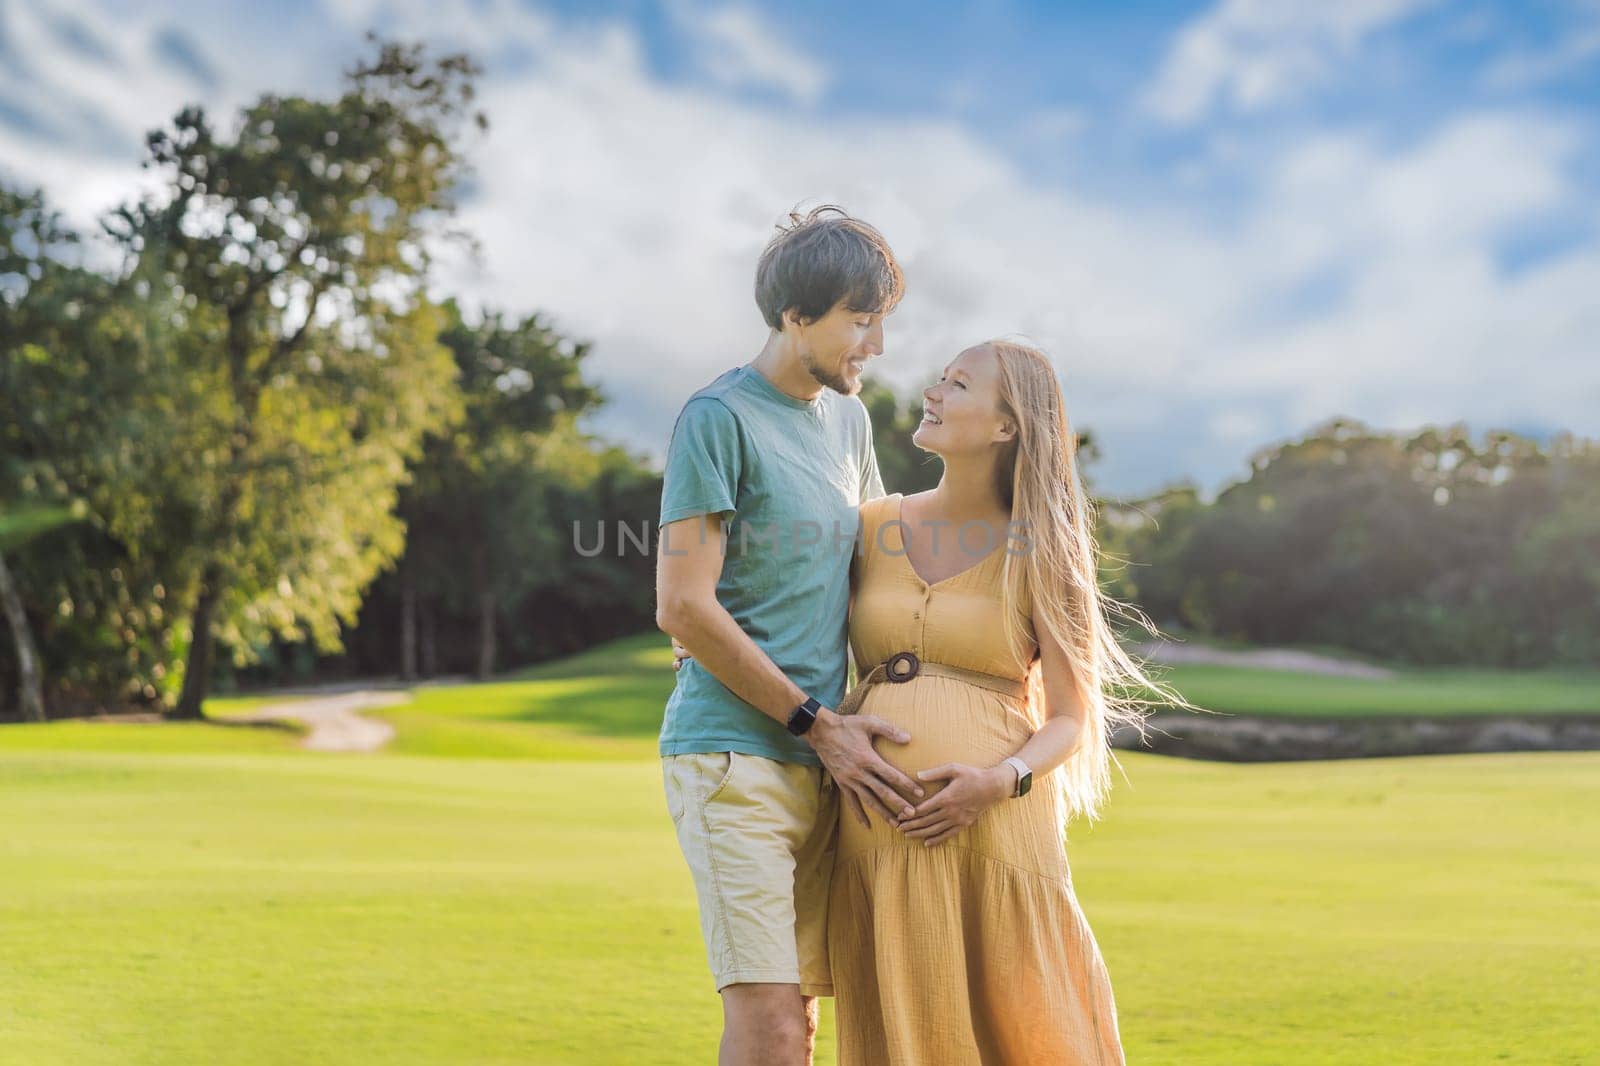 A blissful moment as a pregnant woman and her husband spend quality time together outdoors, savoring each other's company and enjoying the serenity of nature.